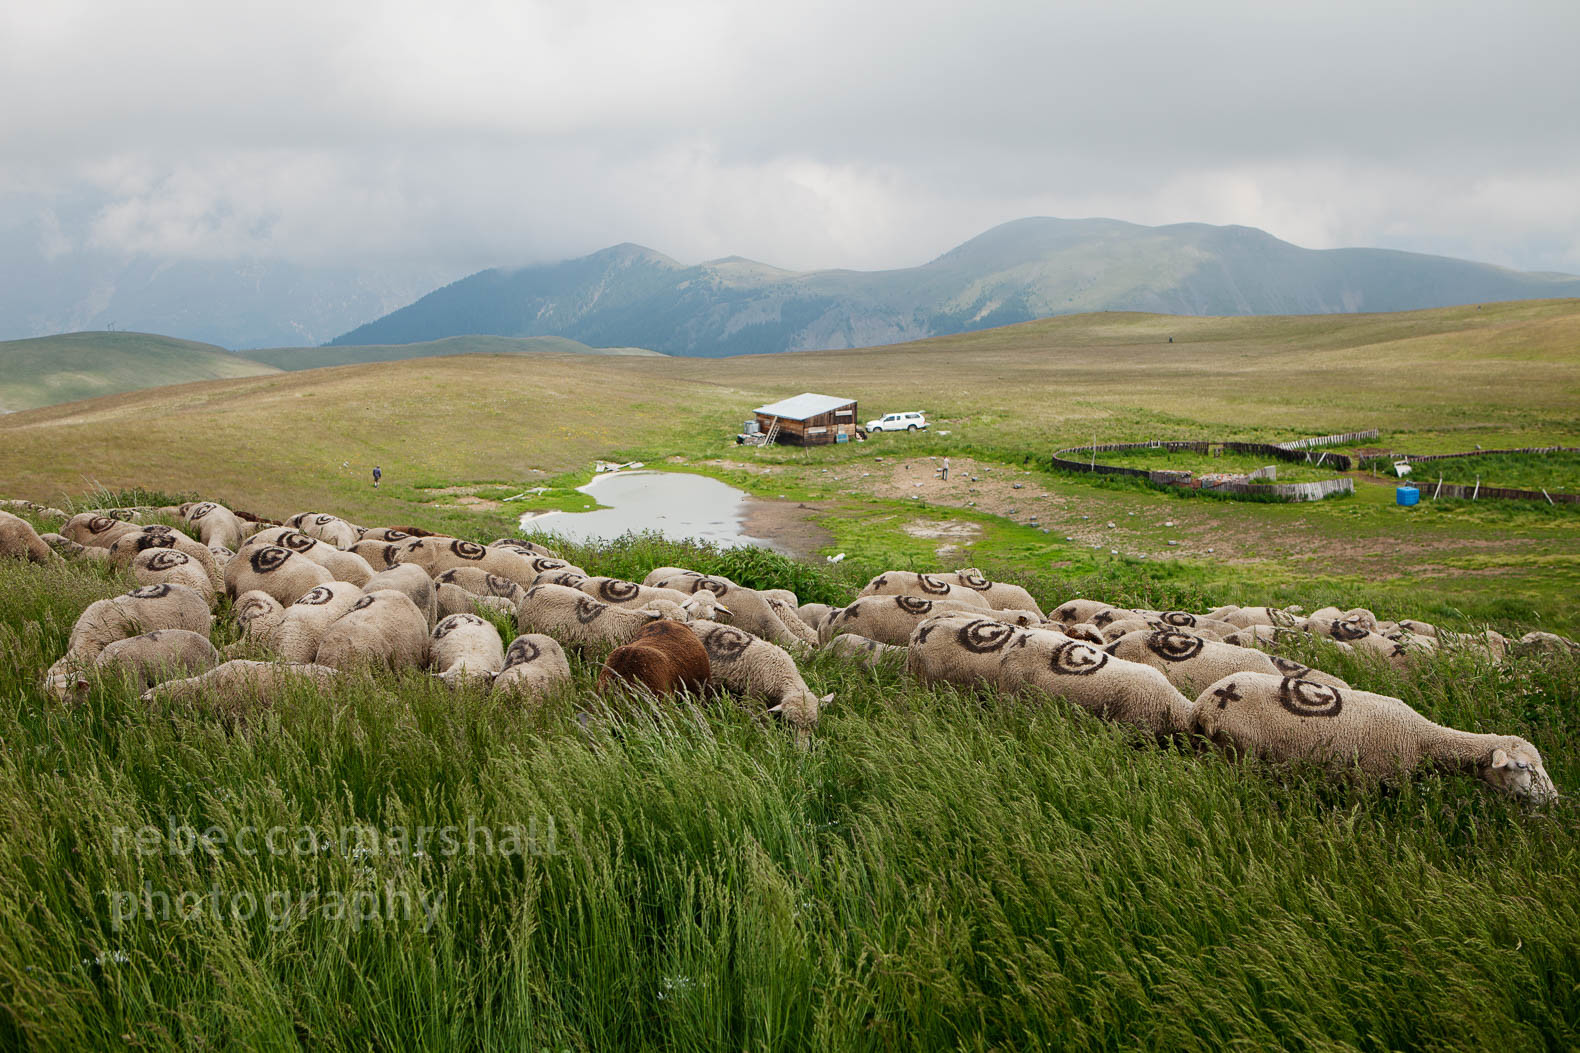 Landscape photograph of flock of sheep on mountaintop with cabin